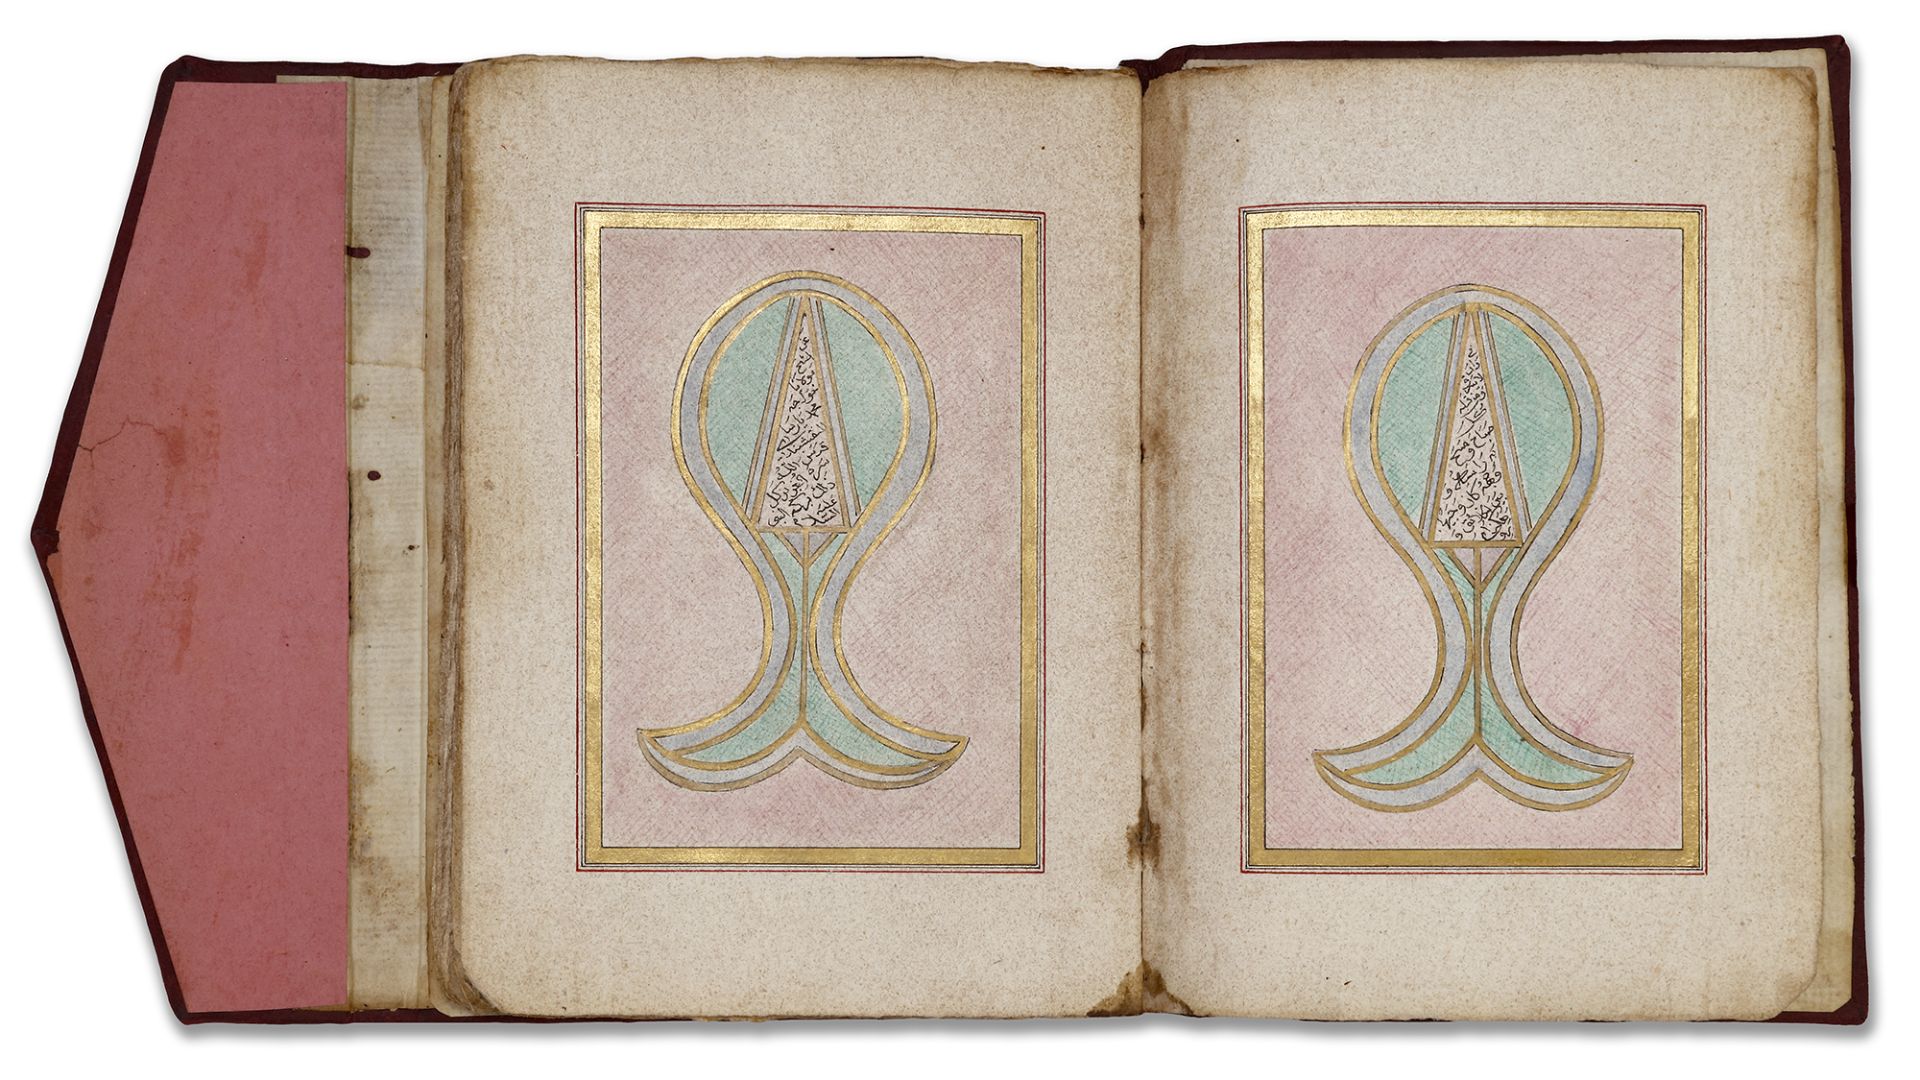 AN OTTOMAN COMPILATION OF PRAYERS AND HOLY PLACES BY ABD AL-QADIR HUSRI, OTTOMAN TURKEY, DATED 1181 - Image 3 of 12